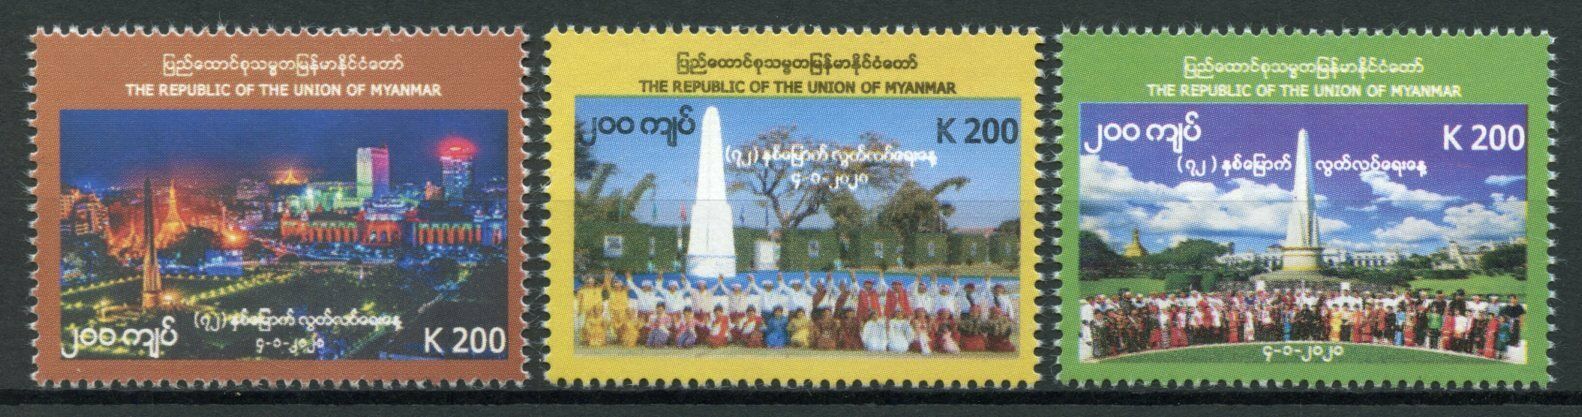 Myanmar Architecture Stamps 2020 MNH Independence Day Cultures 3v Set